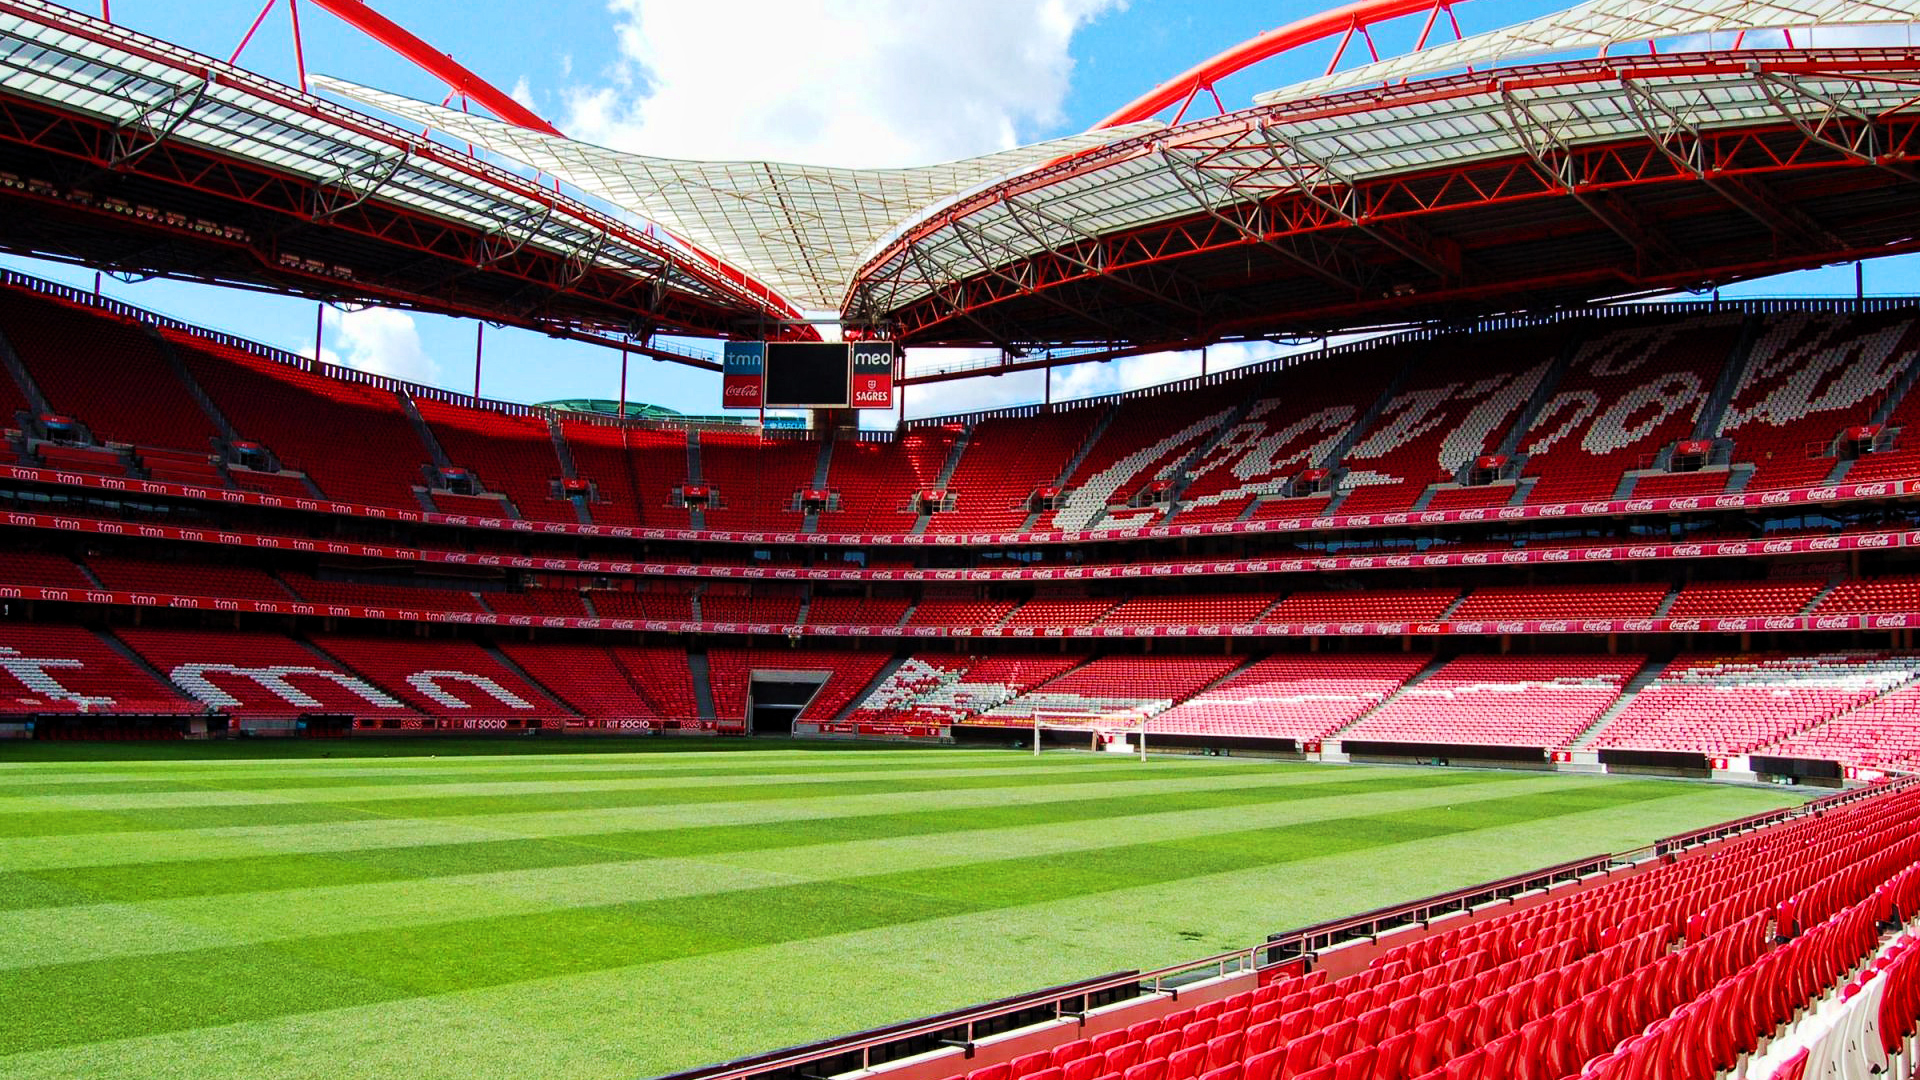 Estádio da Luz. Virtual background to use on Zoom, Microsoft Teams, Skype, Google Meet, WebEx or any other compatible app.